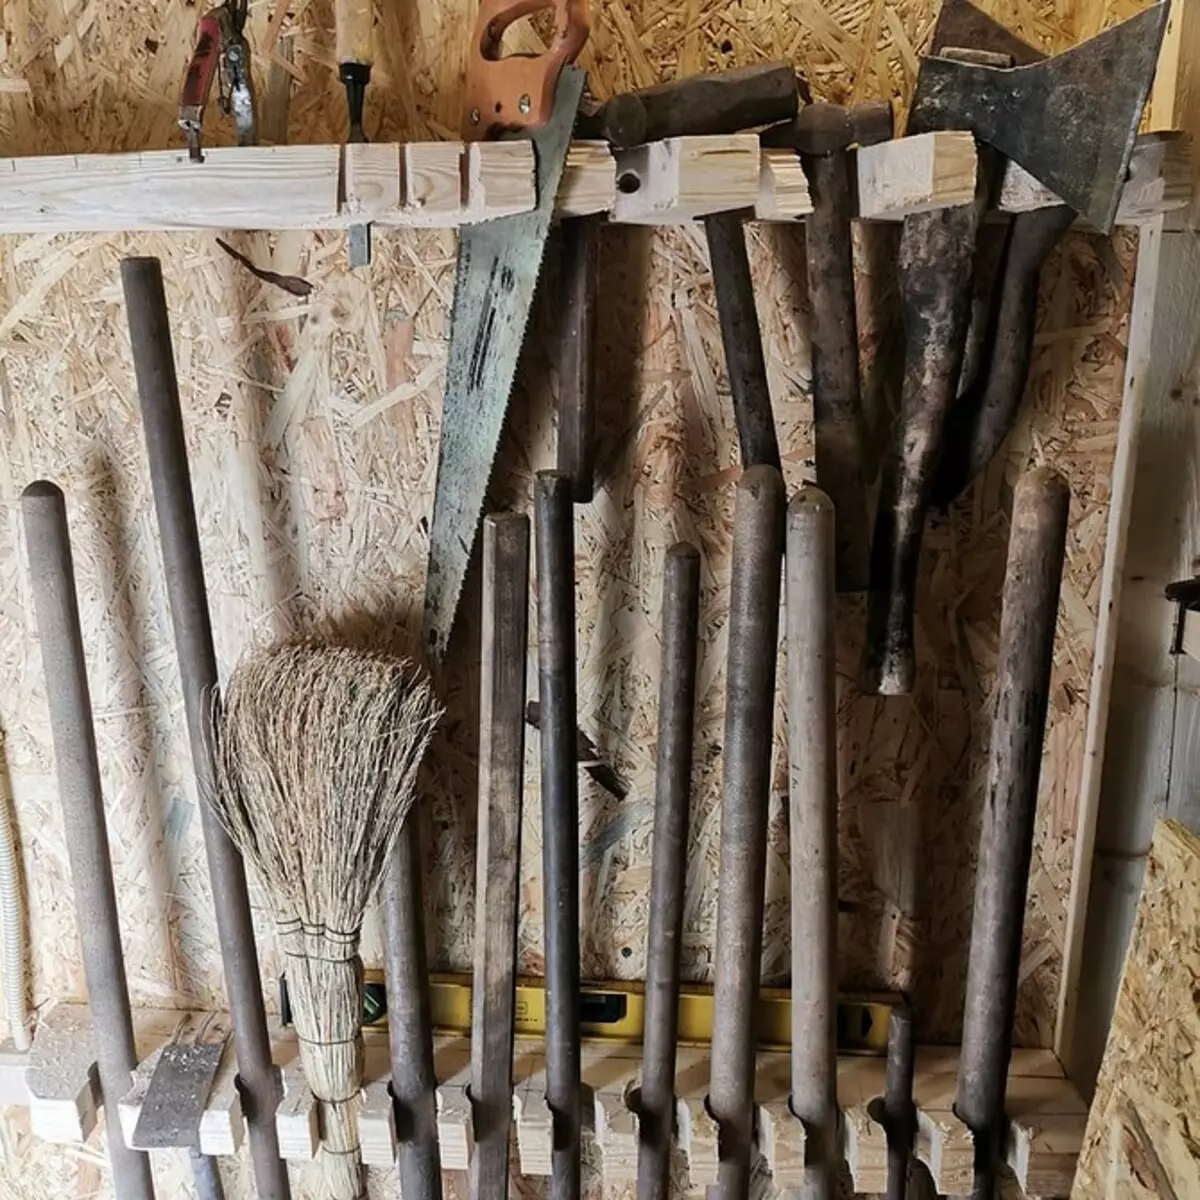 8 ideas for storing tools that will help forget about long searches 4044_7